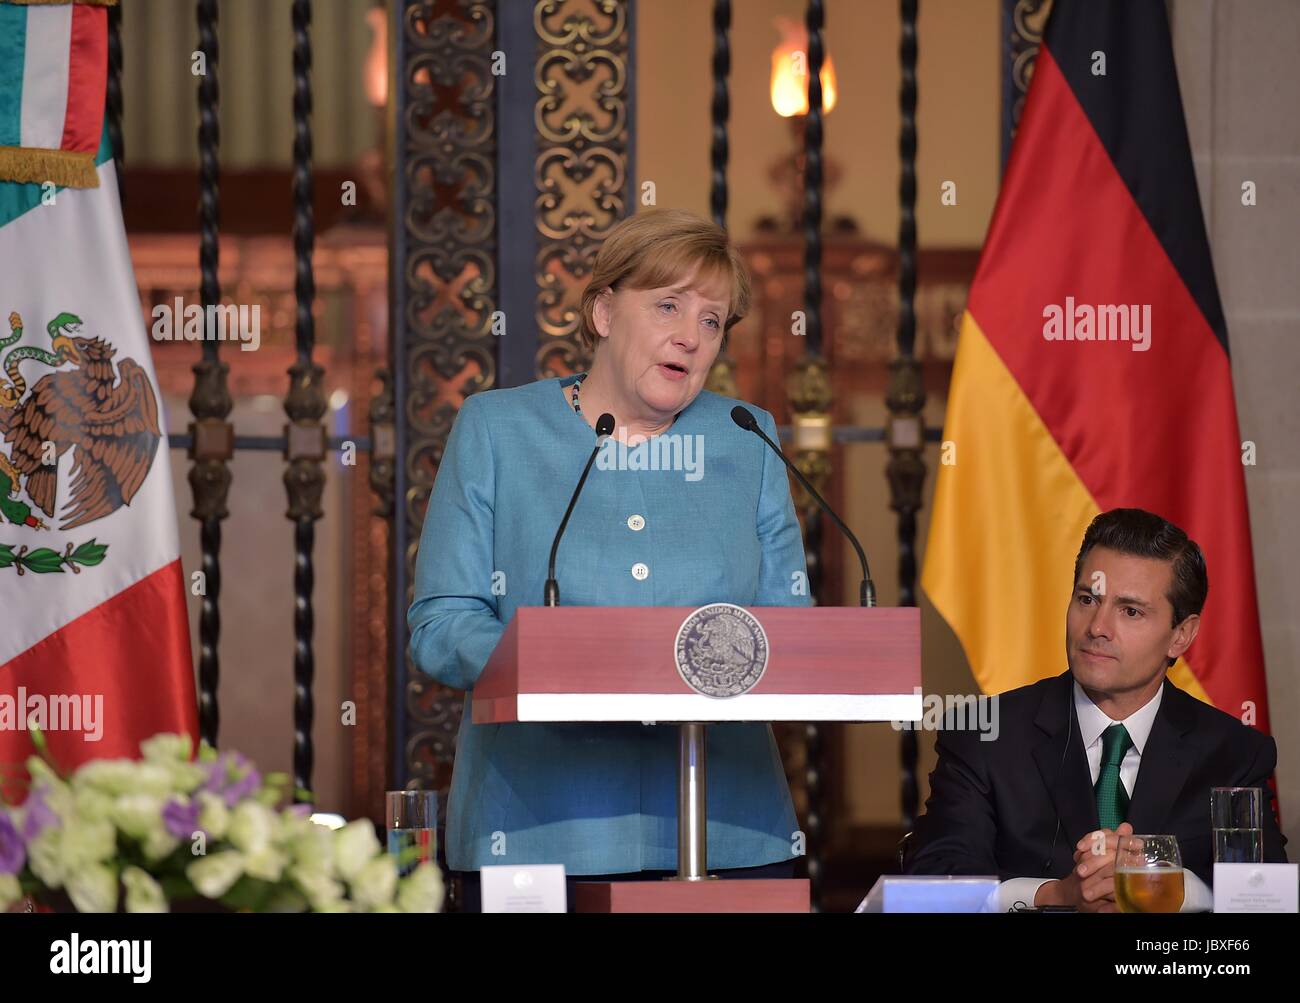 German Chancellor Angela Merkel speaks during reception hosted by Mexican President Enrique Pena Nieto, right, at the National Palace of Los Pinos June 9, 2017 in Mexico City, Mexico. Stock Photo